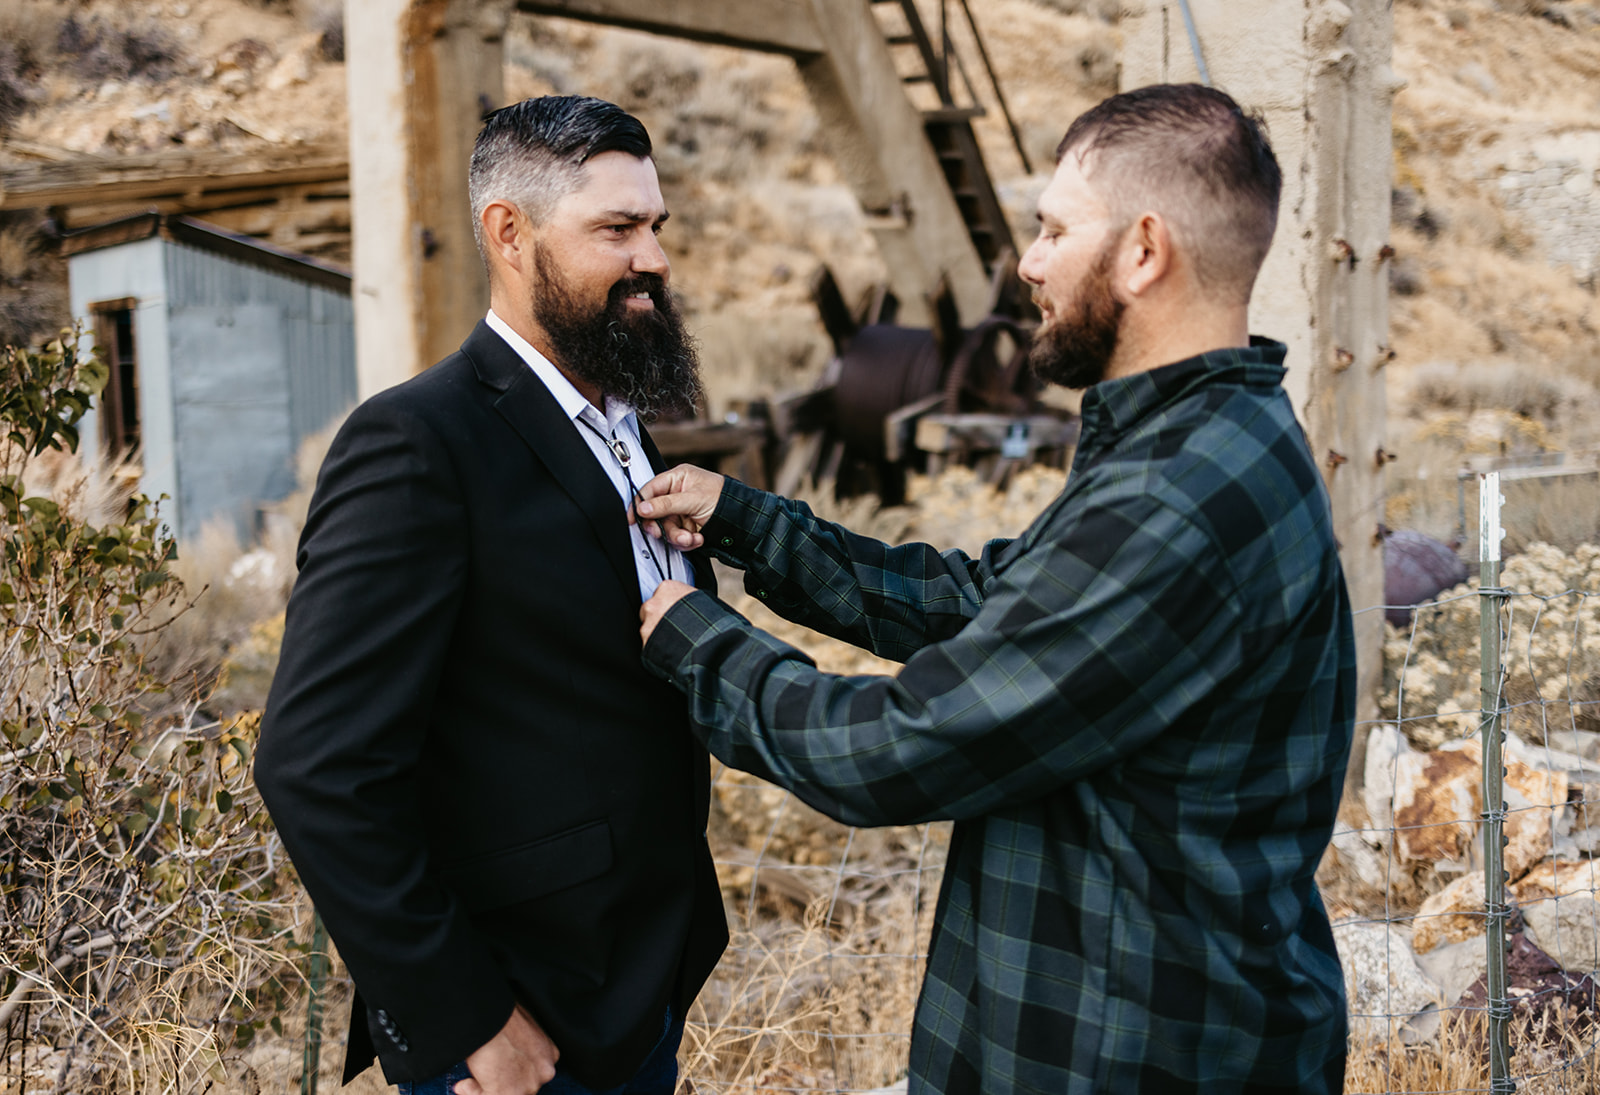 Grooms brother helps him put on his bolo tie